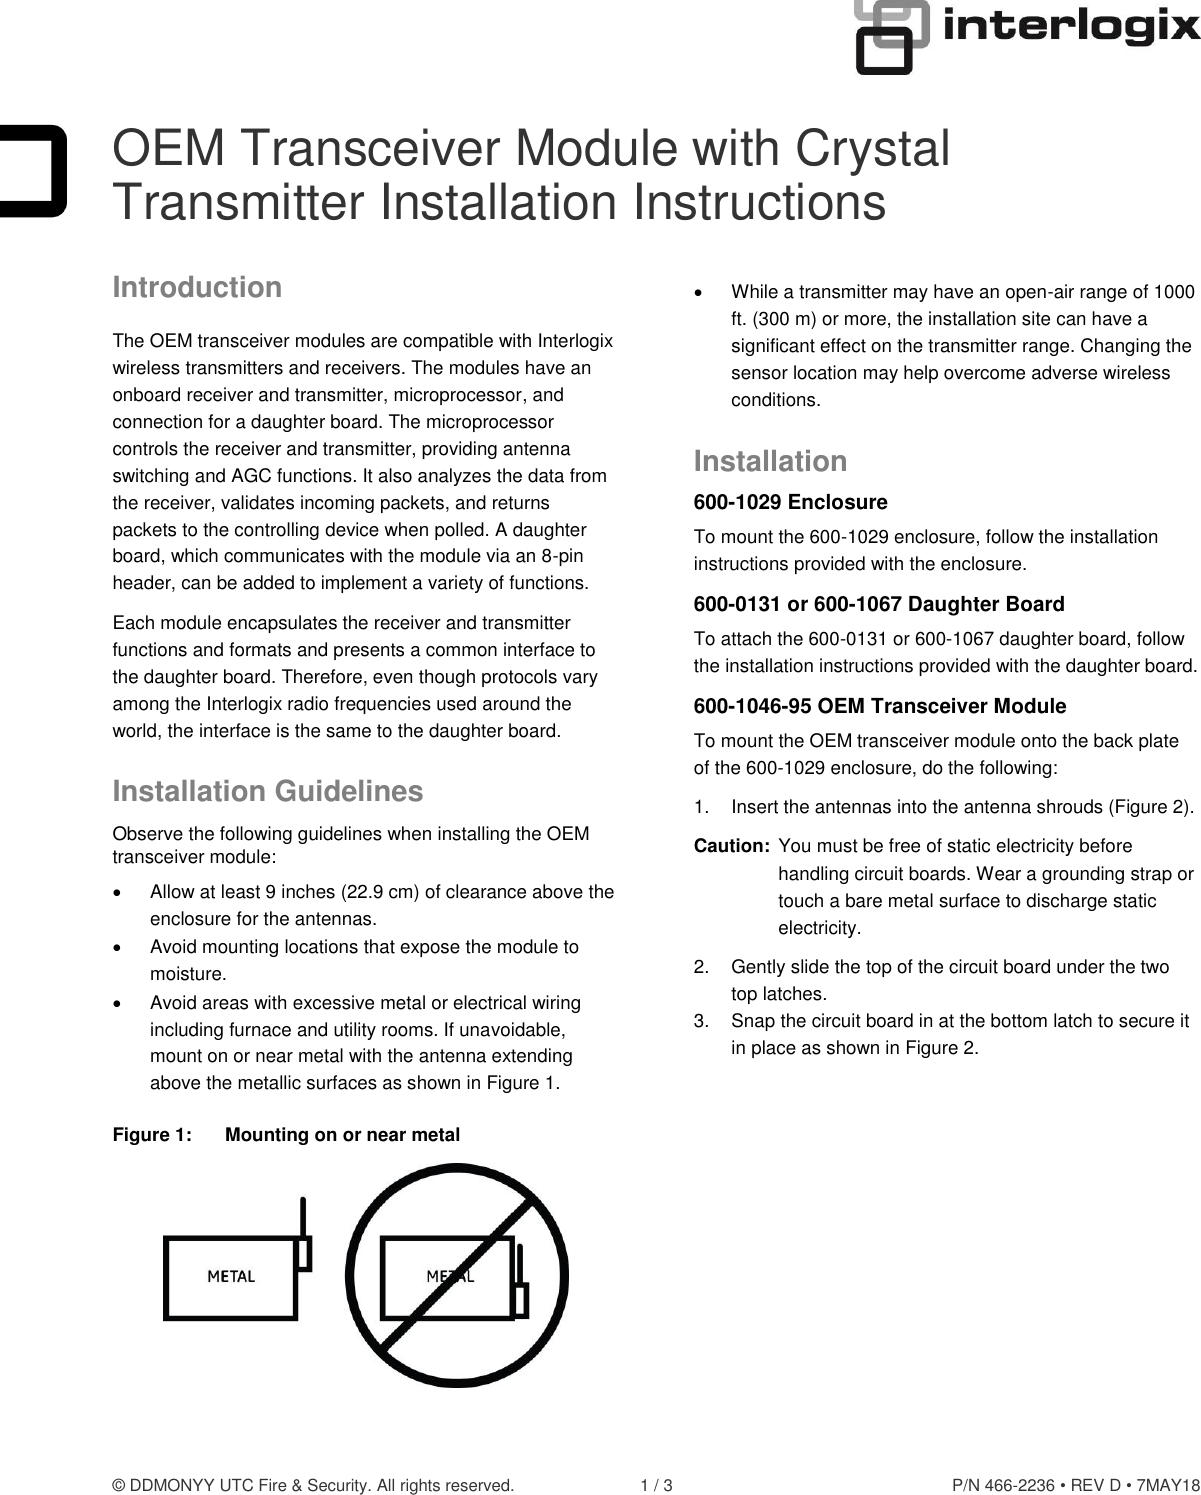 © DDMONYY UTC Fire &amp; Security. All rights reserved.  1 / 3  P/N 466-2236 • REV D • 7MAY18  OEM Transceiver Module with Crystal Transmitter Installation Instructions Introduction The OEM transceiver modules are compatible with Interlogix wireless transmitters and receivers. The modules have an onboard receiver and transmitter, microprocessor, and connection for a daughter board. The microprocessor controls the receiver and transmitter, providing antenna switching and AGC functions. It also analyzes the data from the receiver, validates incoming packets, and returns packets to the controlling device when polled. A daughter board, which communicates with the module via an 8-pin header, can be added to implement a variety of functions. Each module encapsulates the receiver and transmitter functions and formats and presents a common interface to the daughter board. Therefore, even though protocols vary among the Interlogix radio frequencies used around the world, the interface is the same to the daughter board. Installation Guidelines Observe the following guidelines when installing the OEM transceiver module:   Allow at least 9 inches (22.9 cm) of clearance above the enclosure for the antennas.   Avoid mounting locations that expose the module to moisture.   Avoid areas with excessive metal or electrical wiring including furnace and utility rooms. If unavoidable, mount on or near metal with the antenna extending above the metallic surfaces as shown in Figure 1. Figure 1:  Mounting on or near metal    While a transmitter may have an open-air range of 1000 ft. (300 m) or more, the installation site can have a significant effect on the transmitter range. Changing the sensor location may help overcome adverse wireless conditions. Installation 600-1029 Enclosure To mount the 600-1029 enclosure, follow the installation instructions provided with the enclosure. 600-0131 or 600-1067 Daughter Board To attach the 600-0131 or 600-1067 daughter board, follow the installation instructions provided with the daughter board. 600-1046-95 OEM Transceiver Module To mount the OEM transceiver module onto the back plate of the 600-1029 enclosure, do the following: 1.  Insert the antennas into the antenna shrouds (Figure 2). Caution:  You must be free of static electricity before handling circuit boards. Wear a grounding strap or touch a bare metal surface to discharge static electricity. 2.  Gently slide the top of the circuit board under the two top latches. 3.  Snap the circuit board in at the bottom latch to secure it in place as shown in Figure 2.  